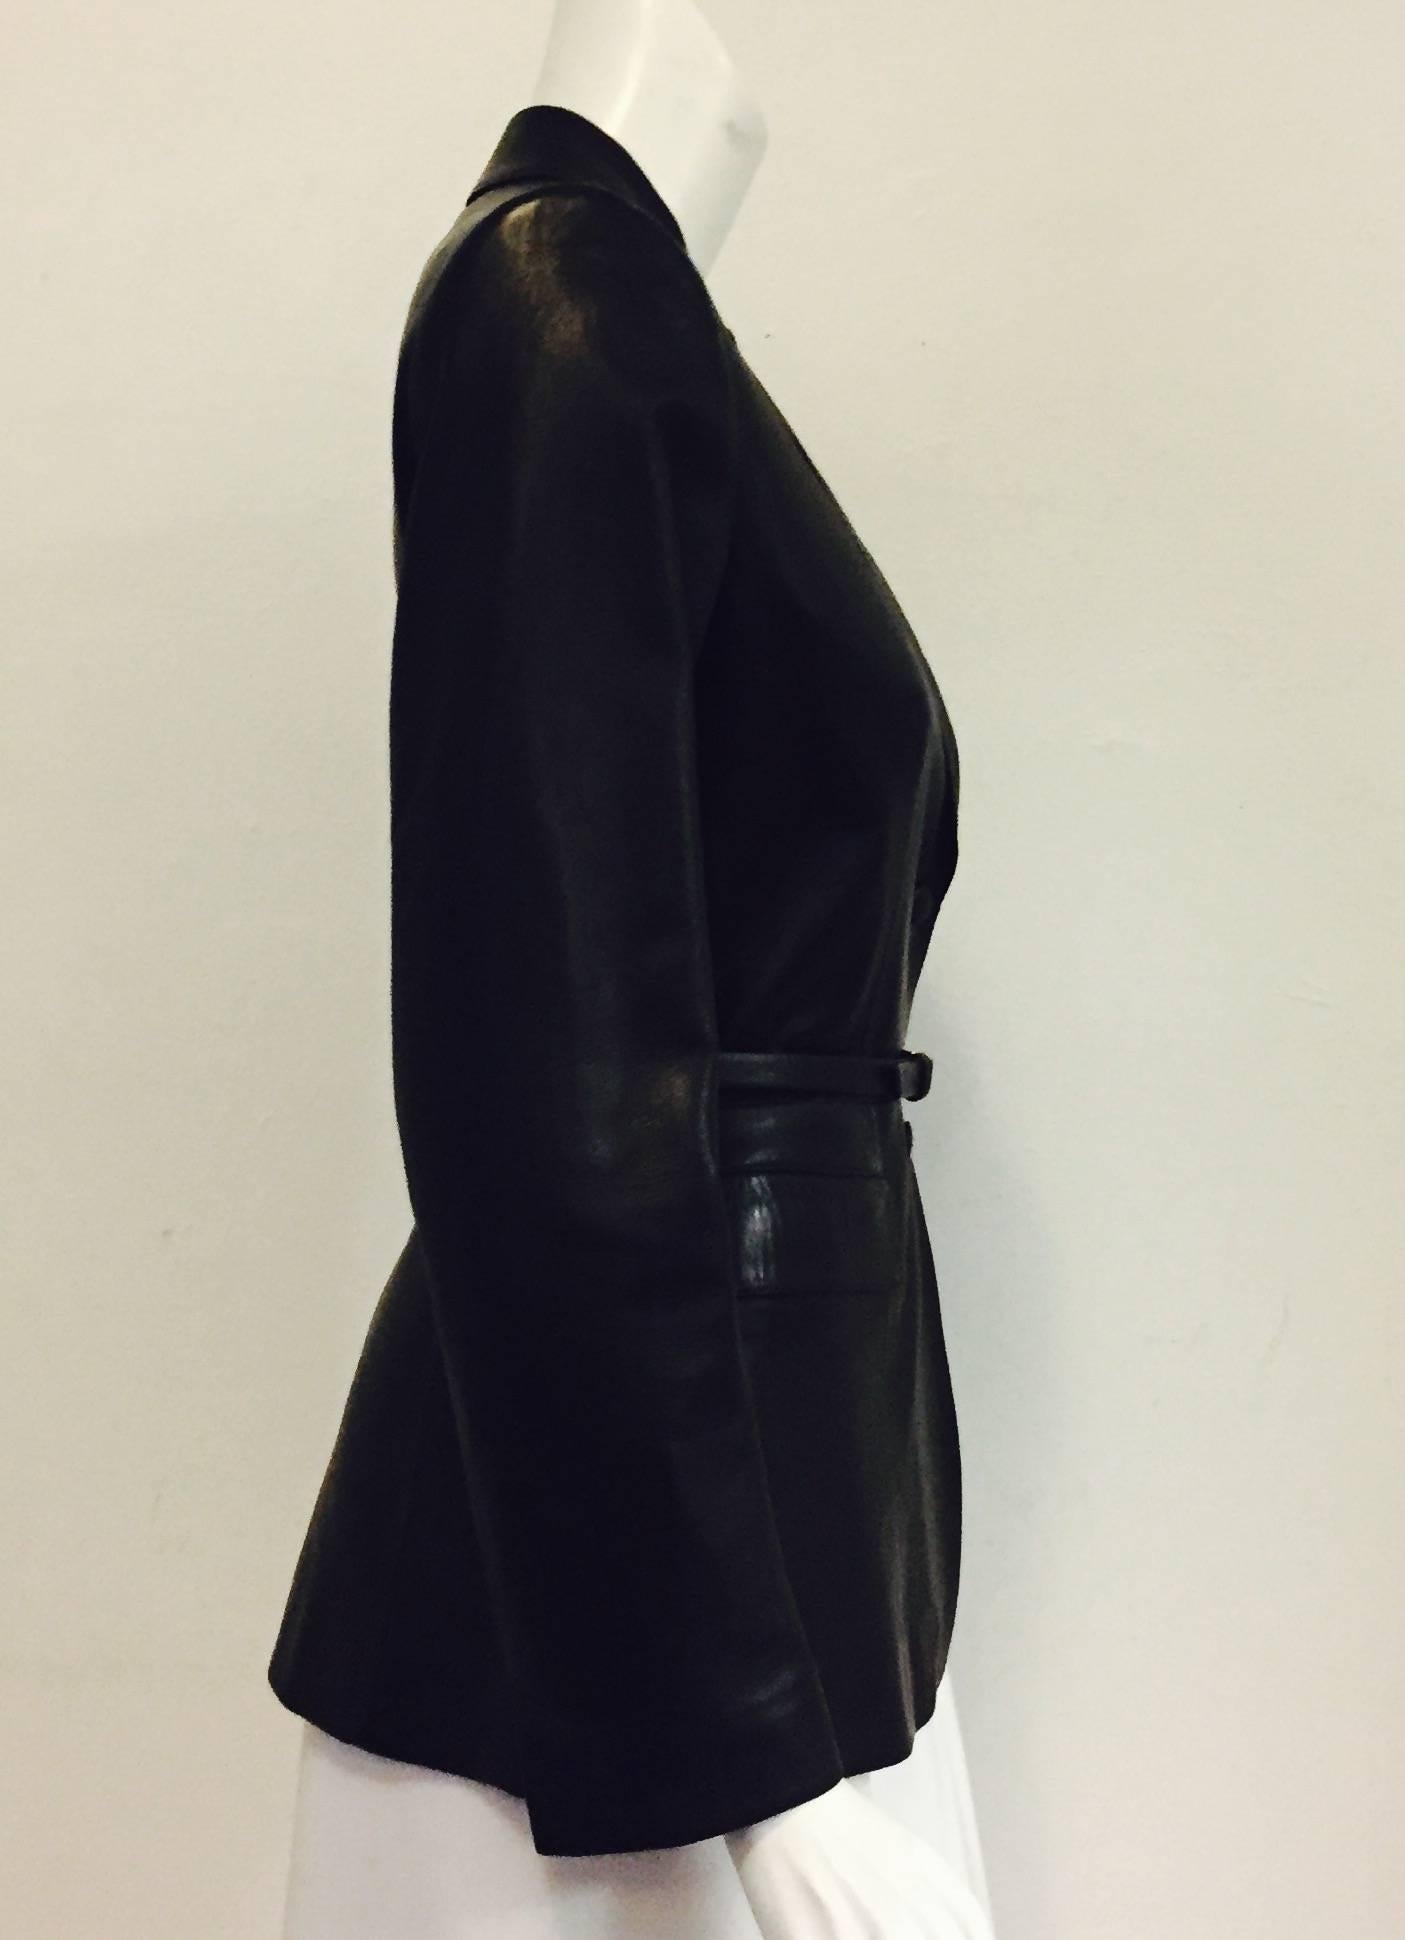 Prada black leather jacket is a statement unto itself!  Features undeniably supple Italian lambskin, notched collar, two covered buttons for closure and two flap pockets.  Accentuated waistline perfects the Prada appearance.   The back has a slit at